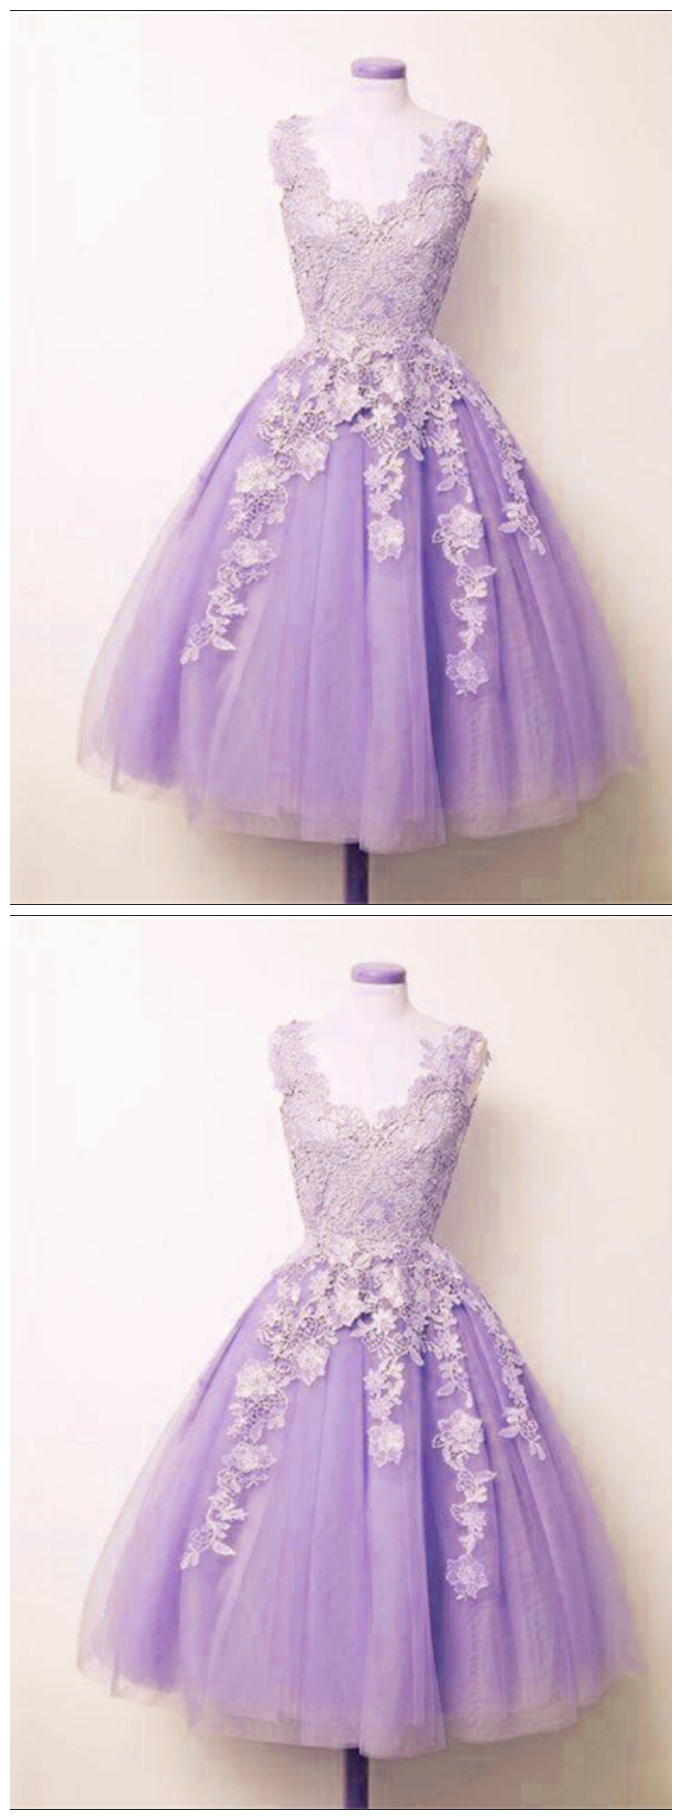 Lace Prom Dress,lilac Party Dress,ball Gowns Party Dress,vintage Dress, Dresses,birthday Dresses,elegant Dresses